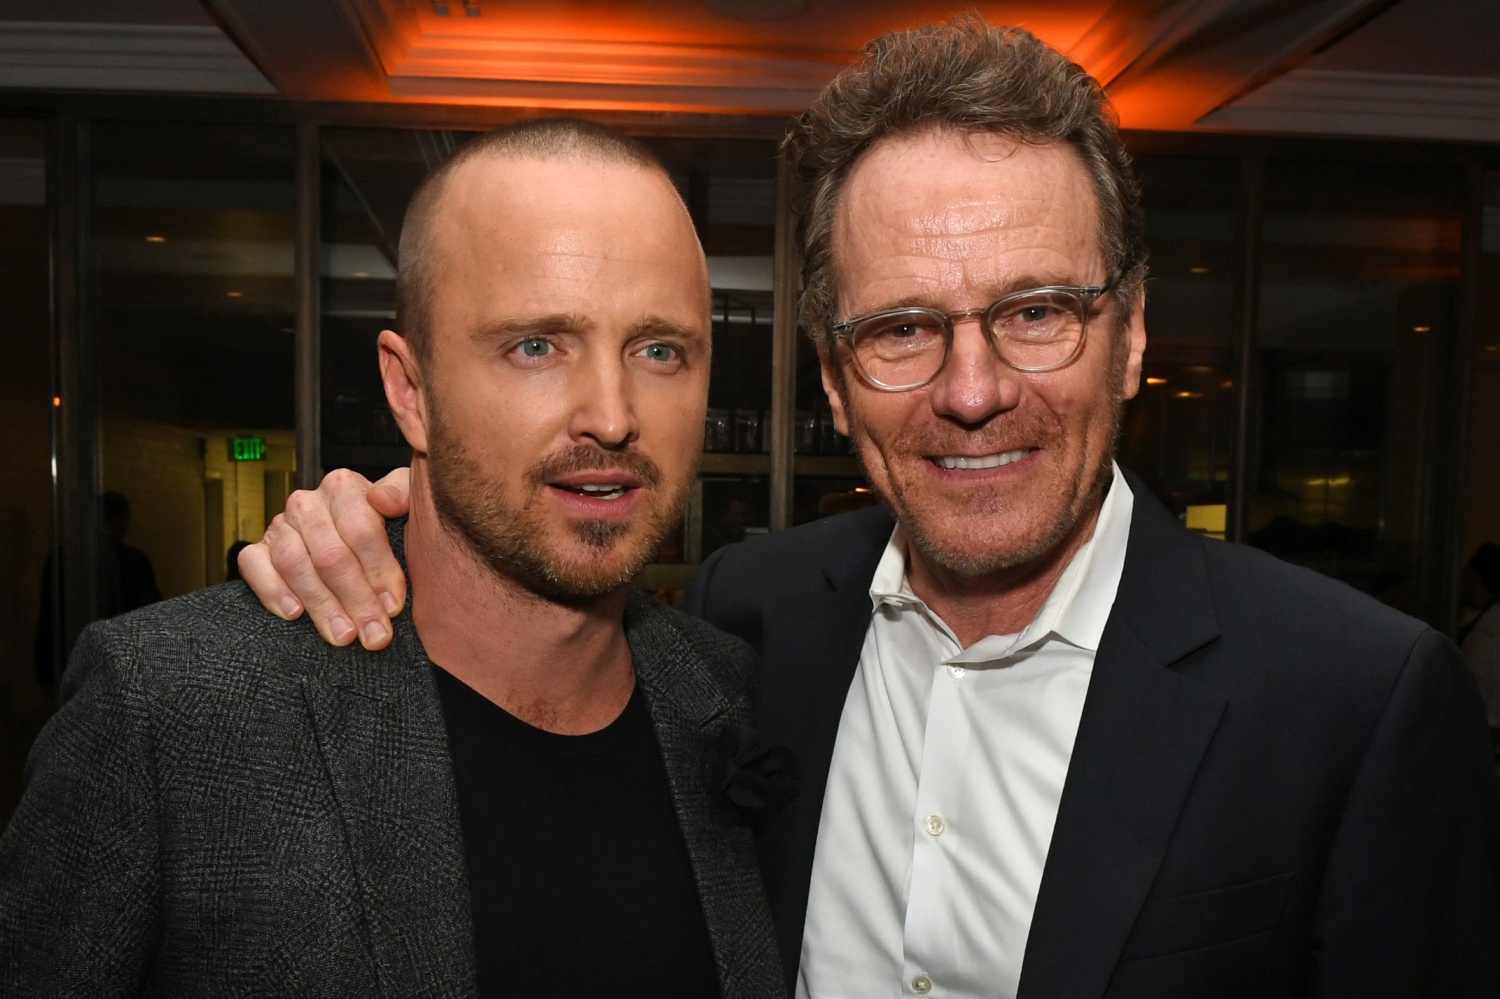 Aaron Paul (L) and Bryan Cranston attend the Premiere of Netflix's "El Camino: A Breaking Bad Movie" After Party at Baltaire on October 07, 2019 in Los Angeles, California. (Photo by Kevin Winter/Getty Images)